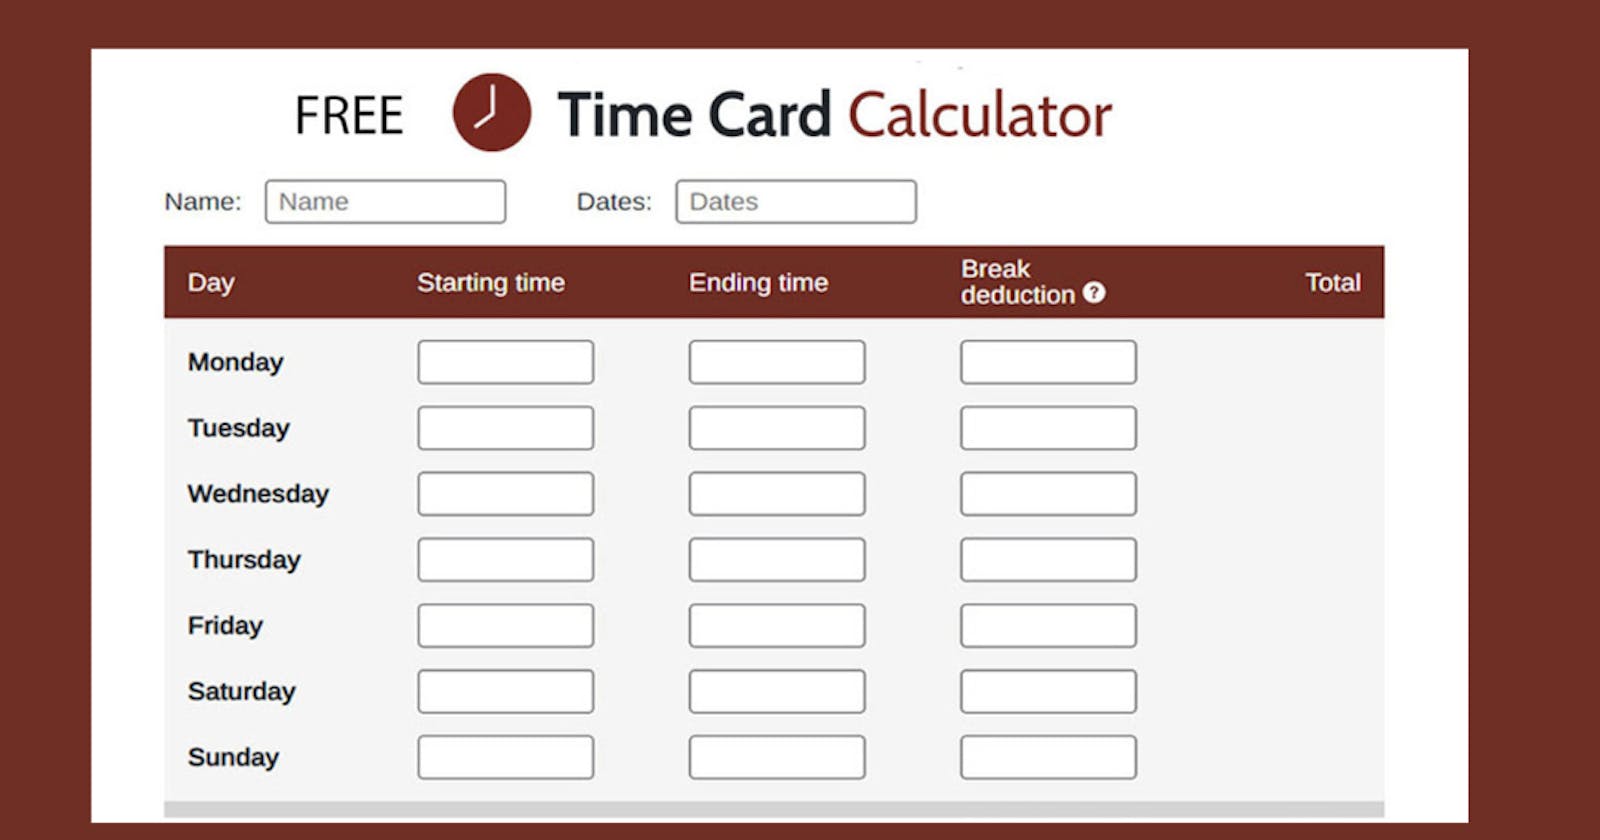 Use a Decimal Hours Conversion Chart: Manually Convert Minutes to Decimals by Dividing by 60; Use Time Clock Software to Automatically Calculate